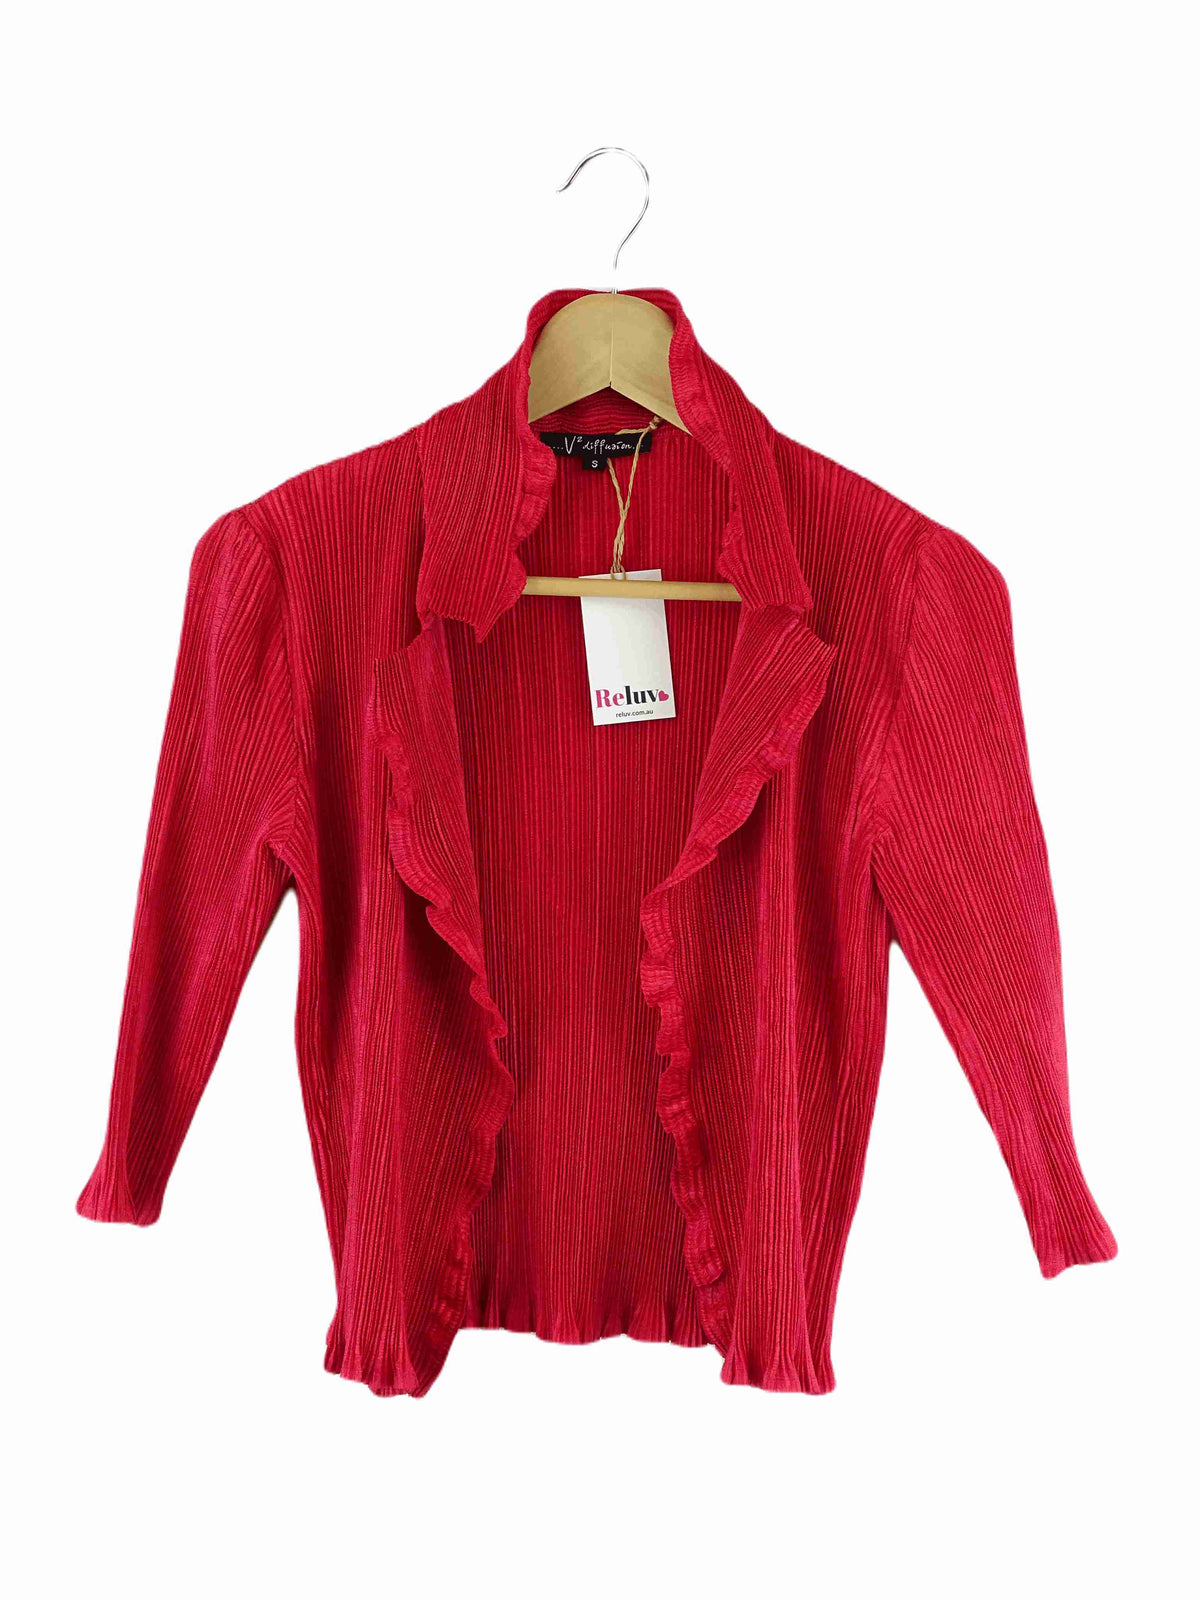 V2 Diffuation Red Jacket S